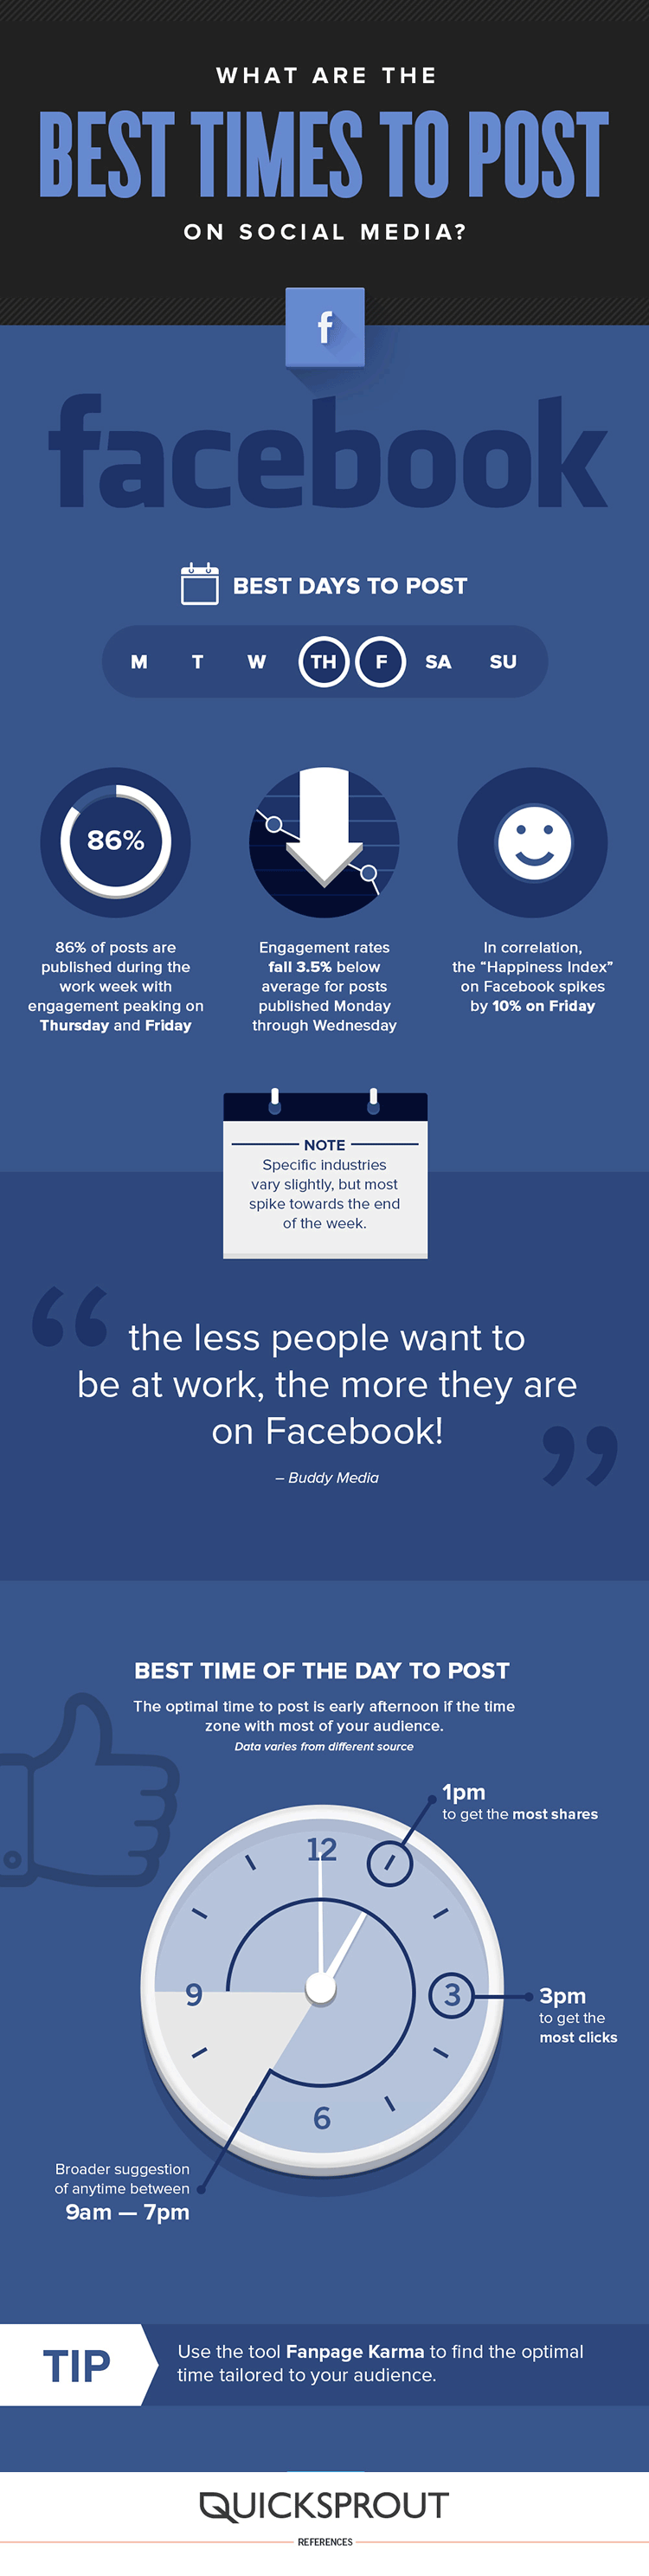 best time to post Facebook infographic